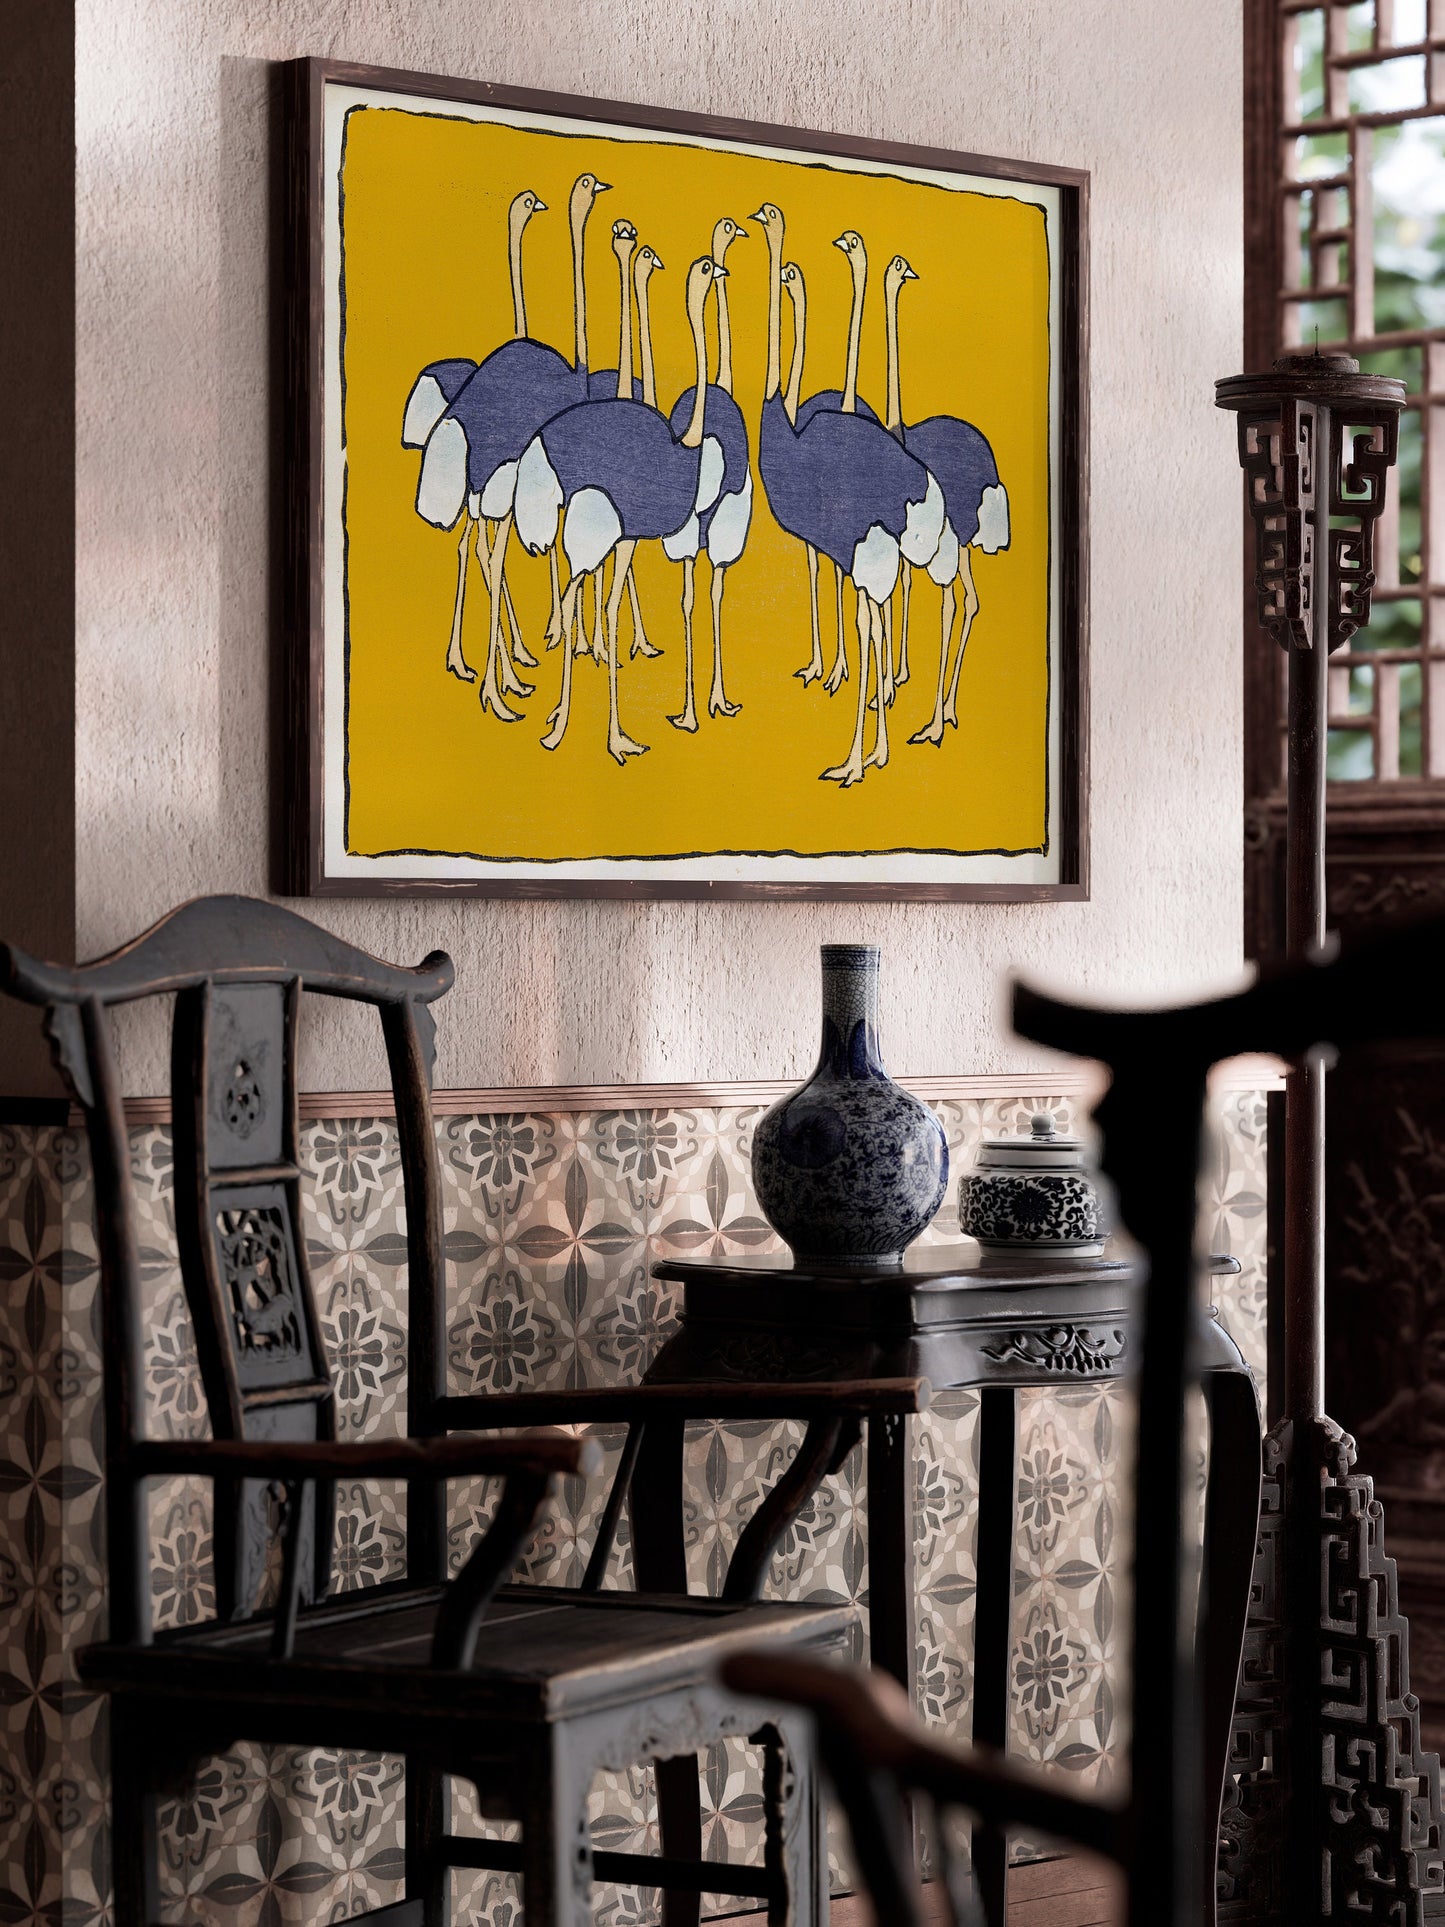 Asai Chū - Ostriches | From Mokugo zuanshū Pl.21 (1908) Vintage Japanese Art in Yellow (Available framed or unframed)